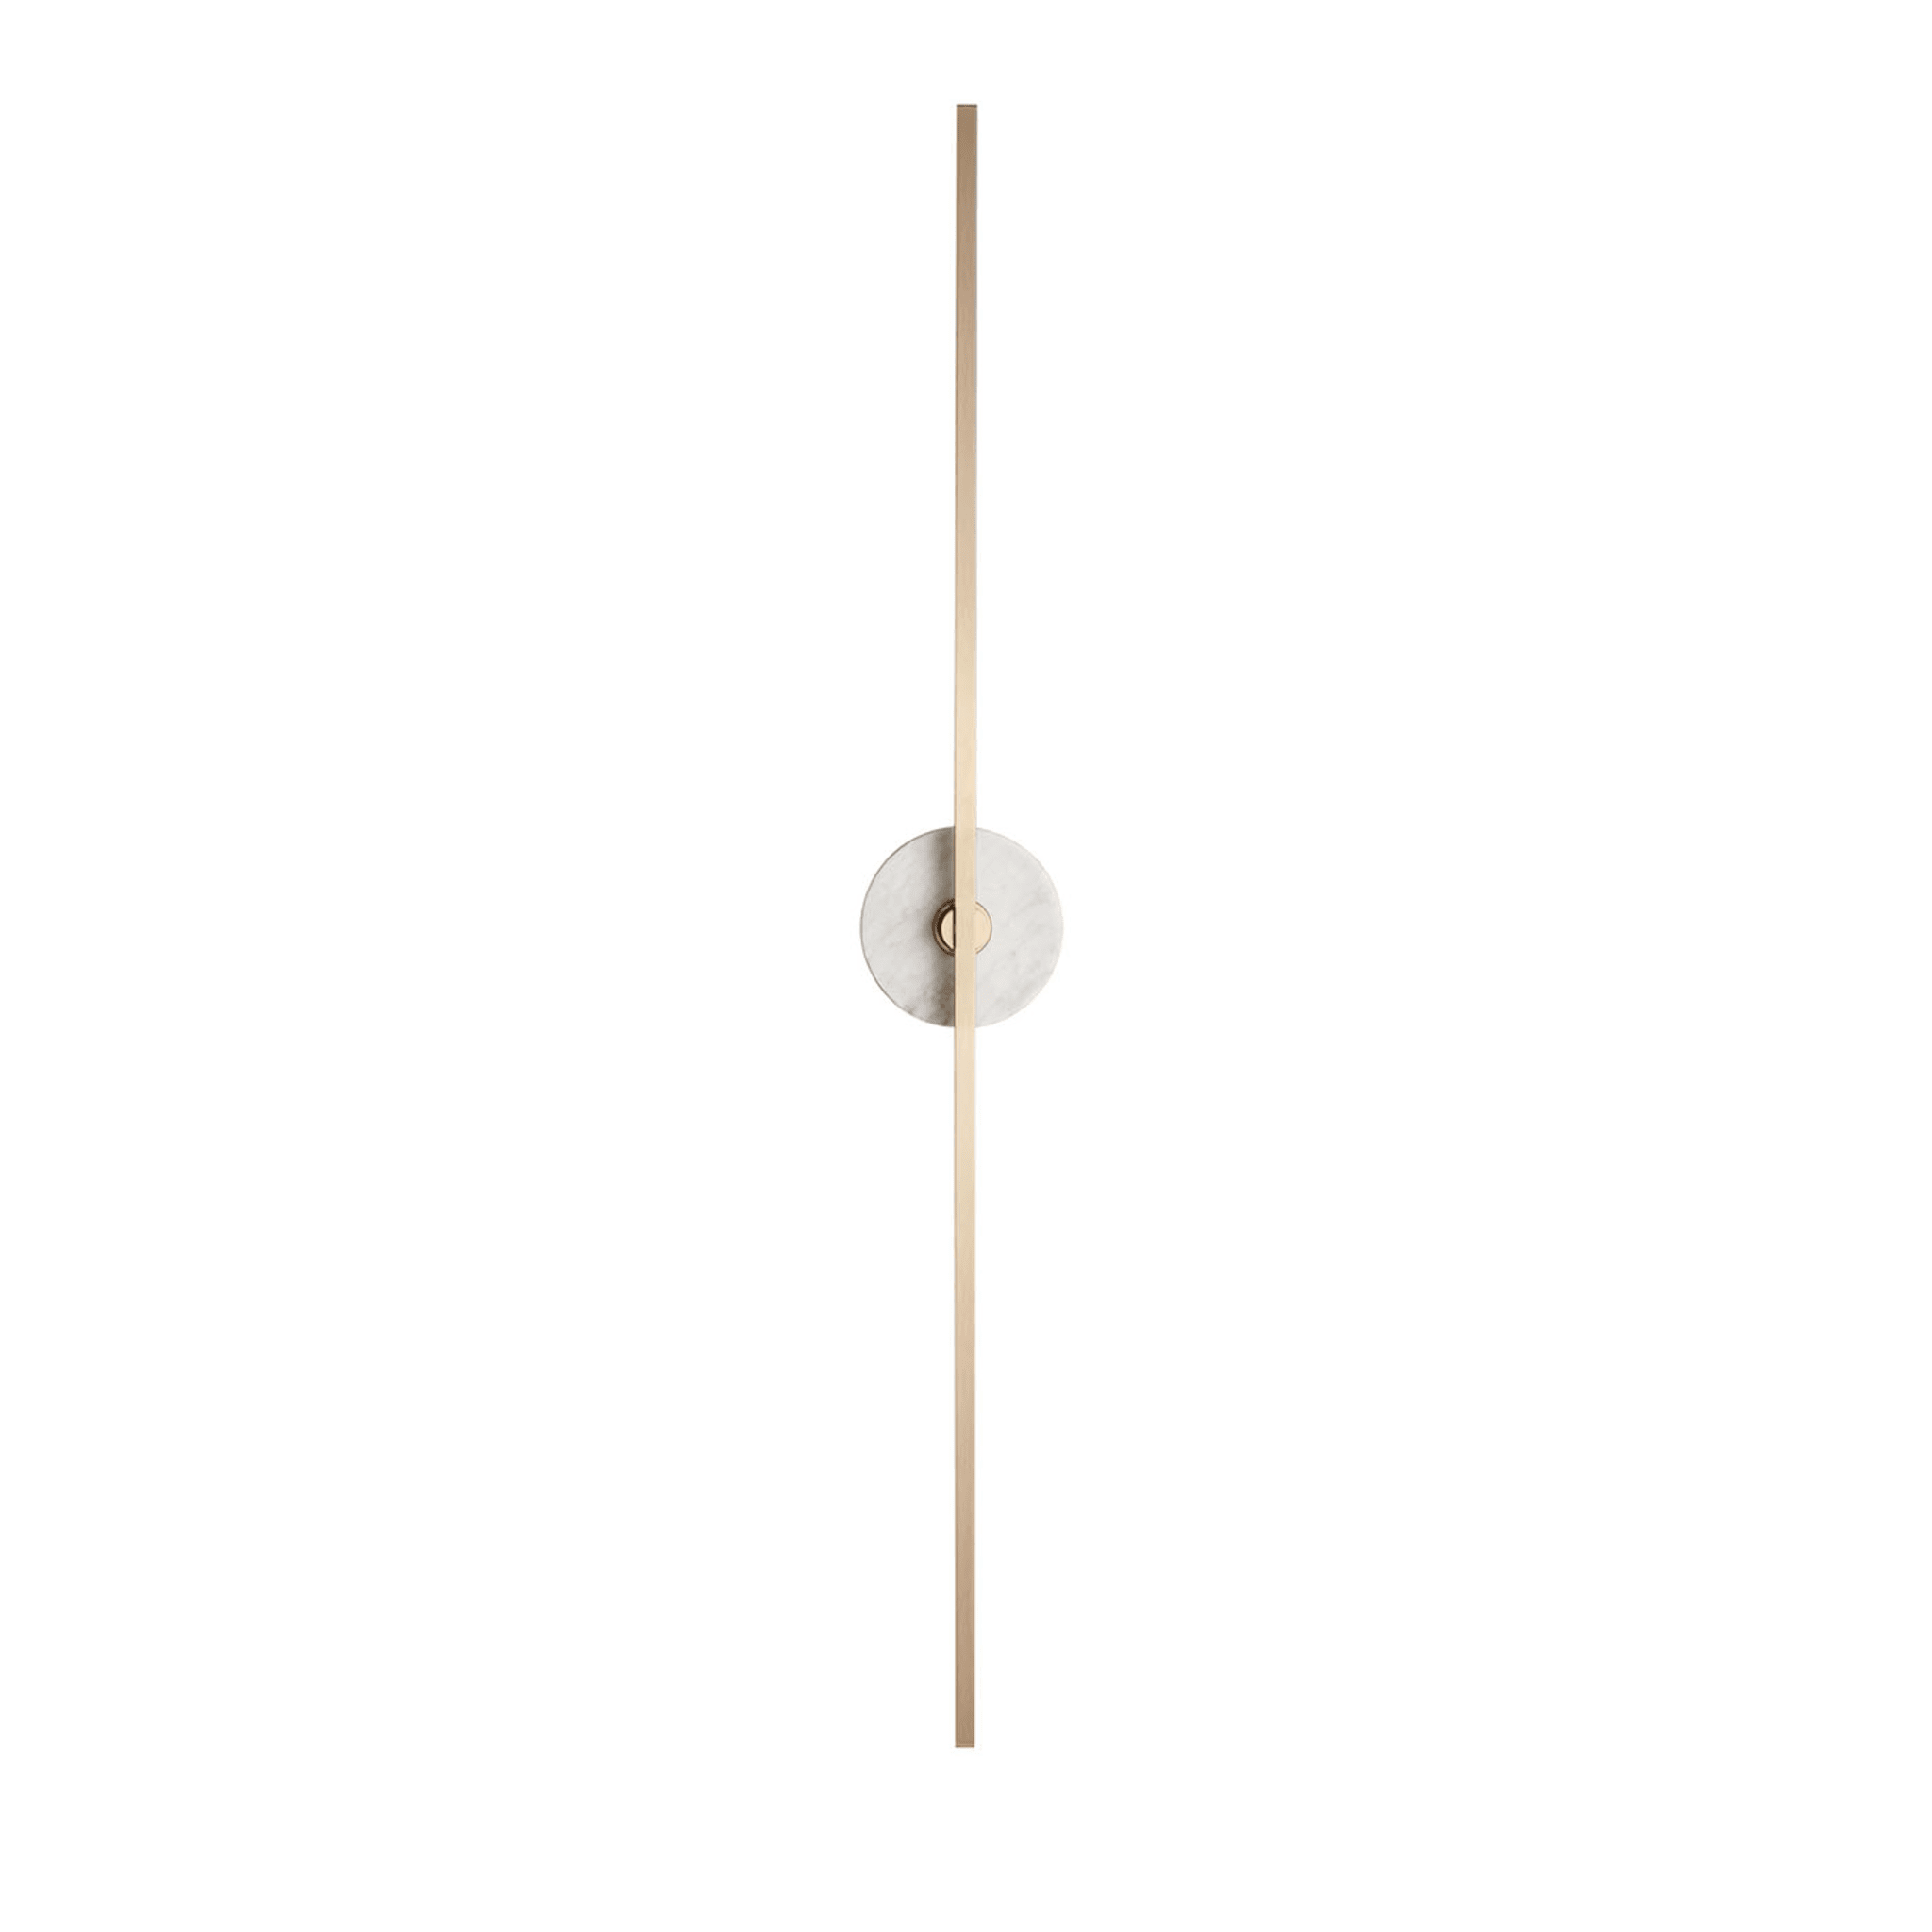 Essential Grand Stick Sconce in white Carrara marble - Main view